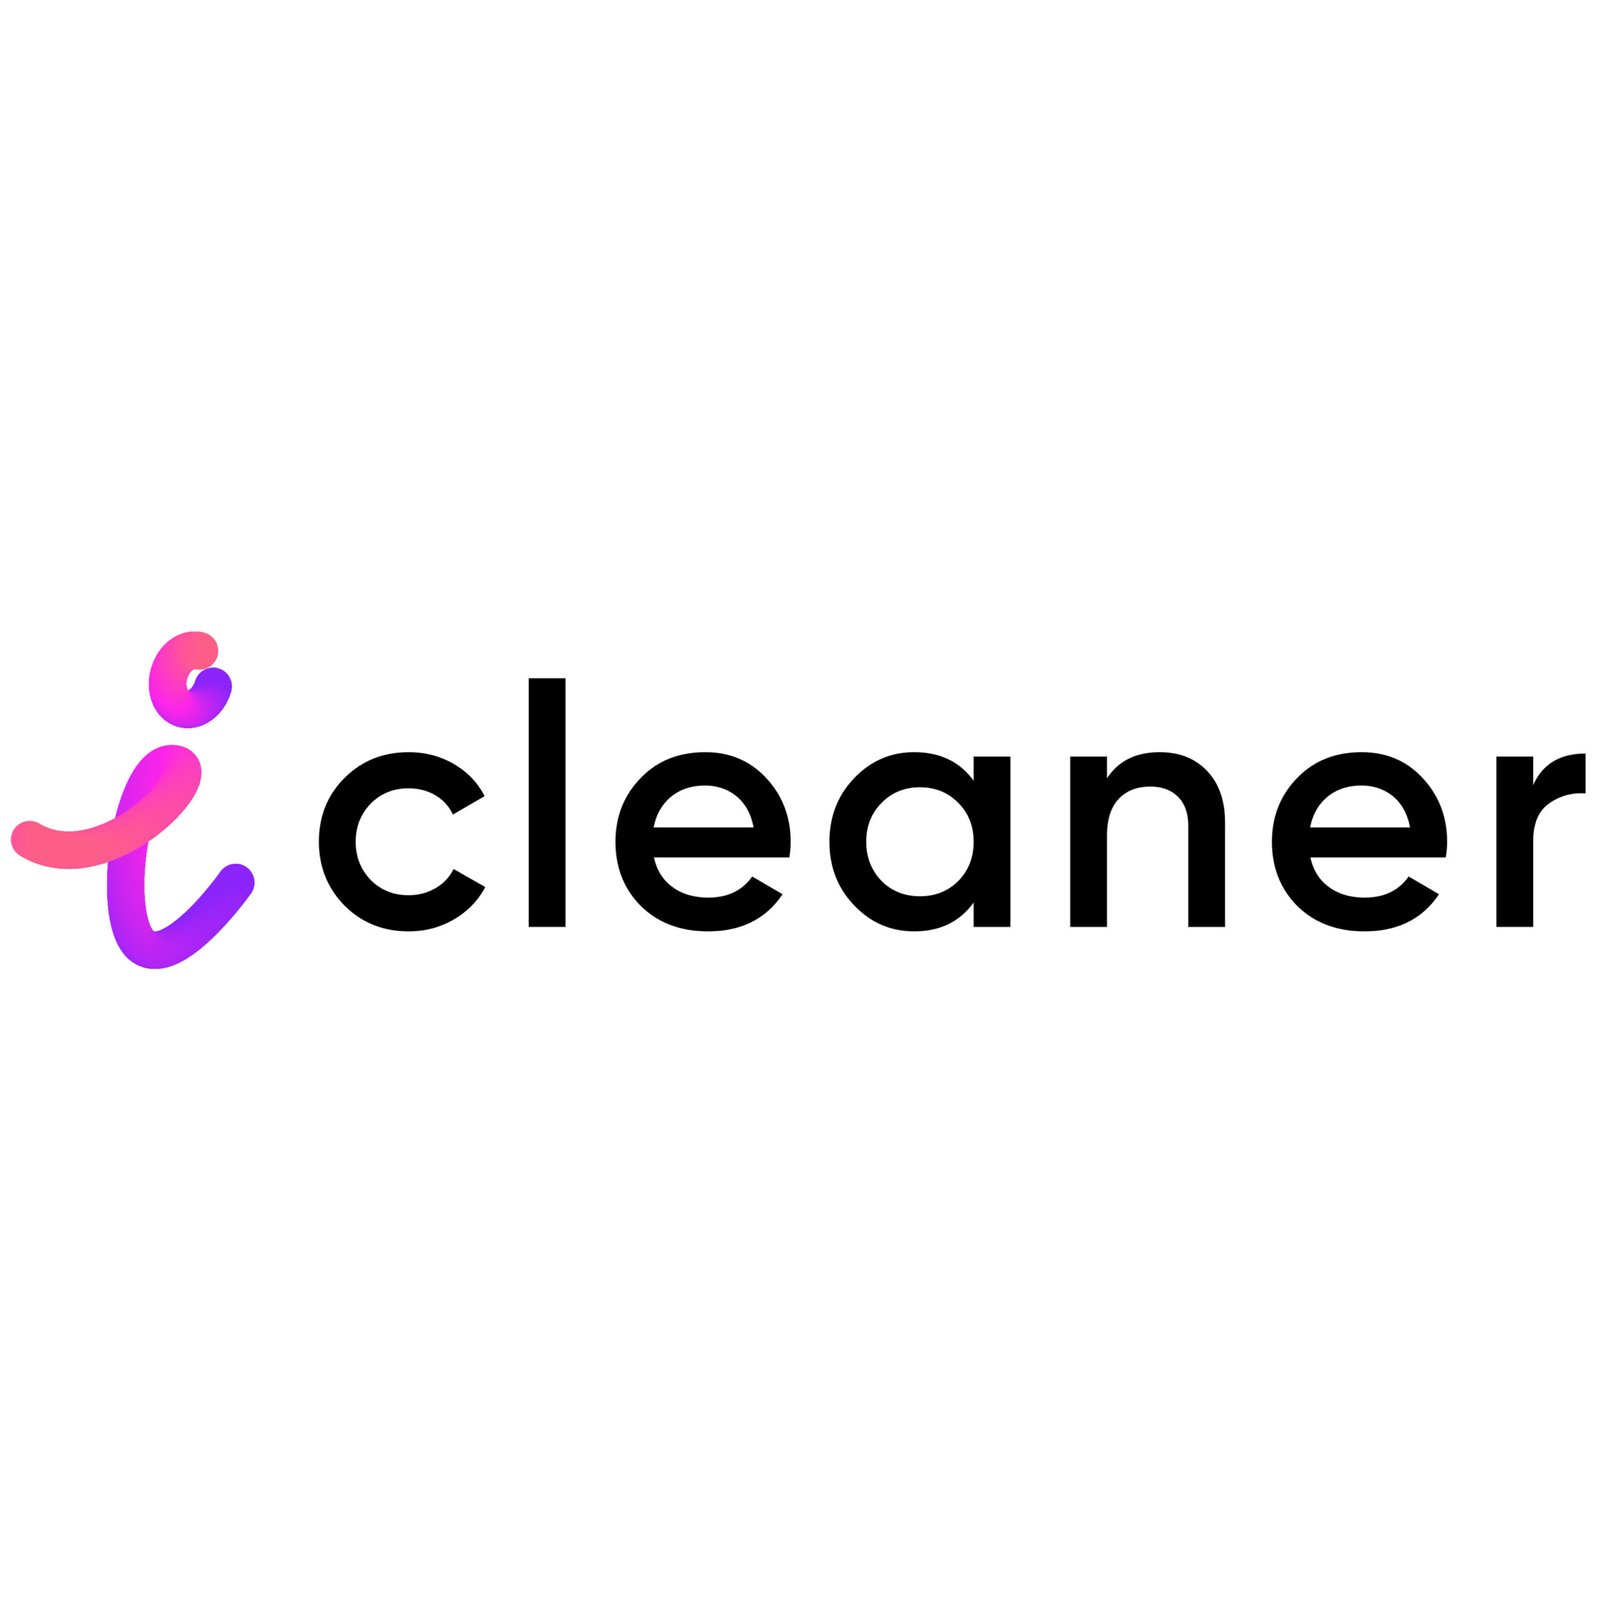 Icleaner brand shoes clean